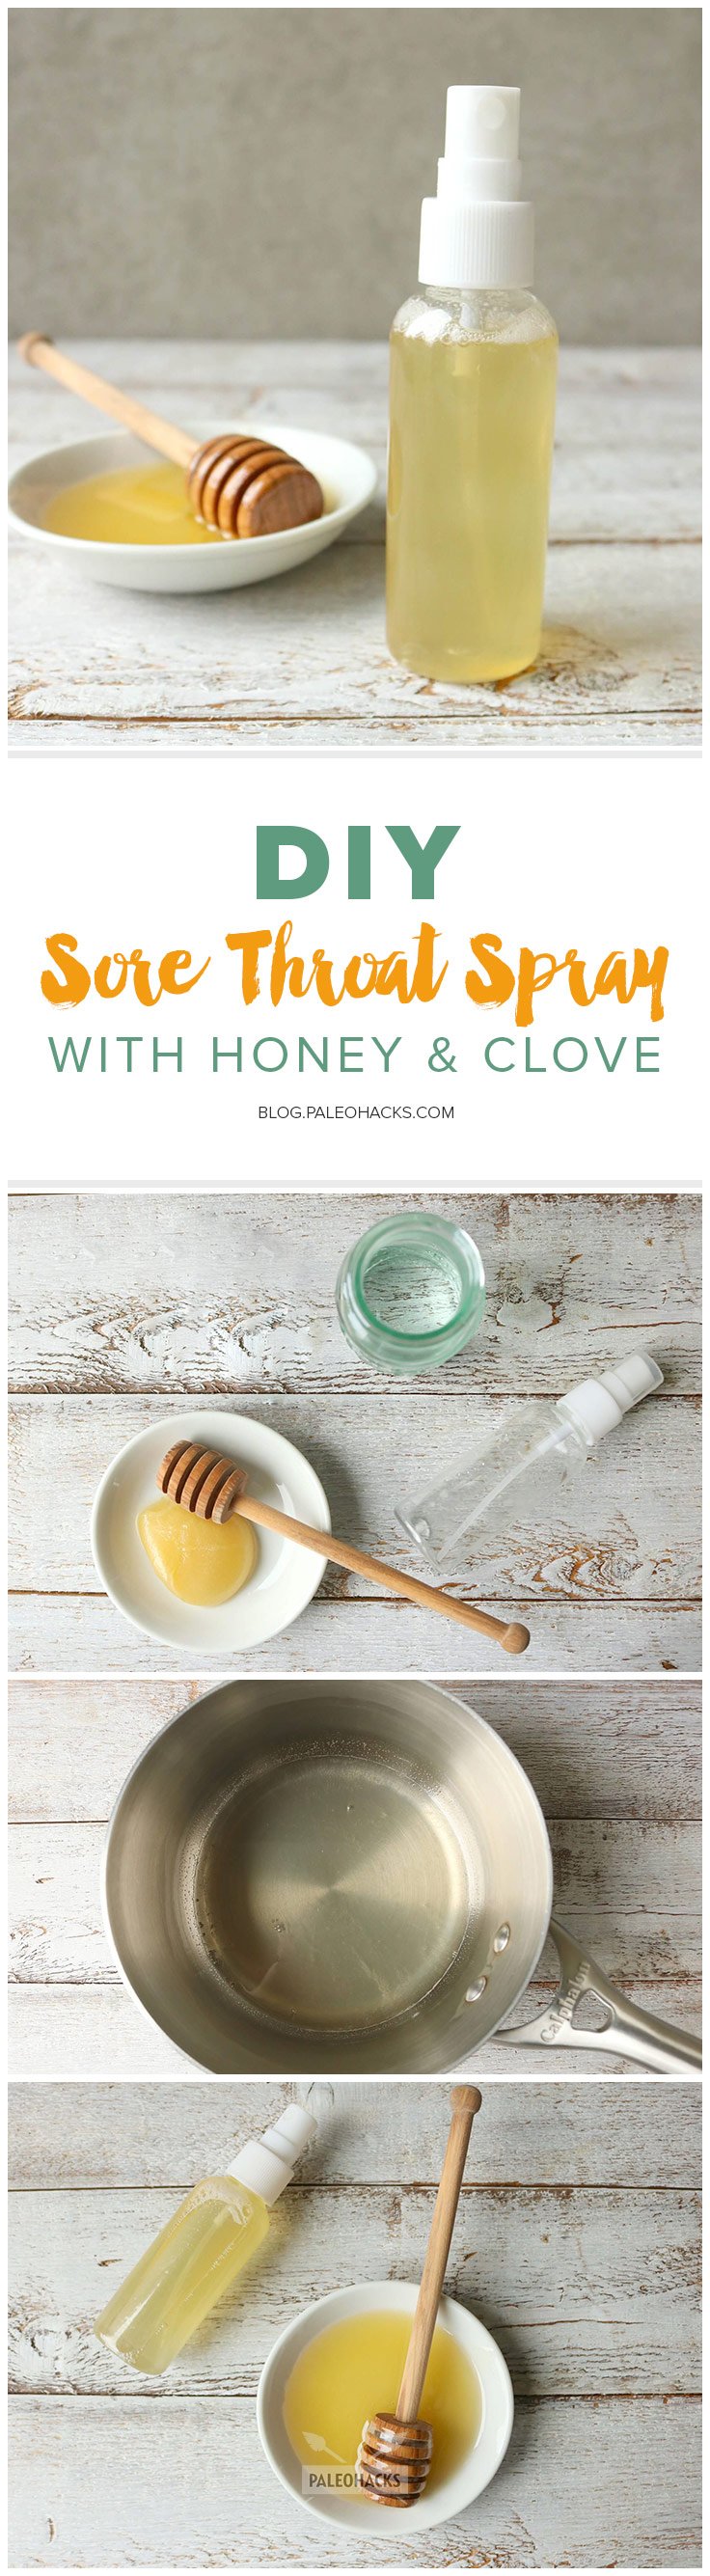 Gently soothe a sore throat with this powerful throat spray. Just the raw power of honey and immune-boosting properties of clove.